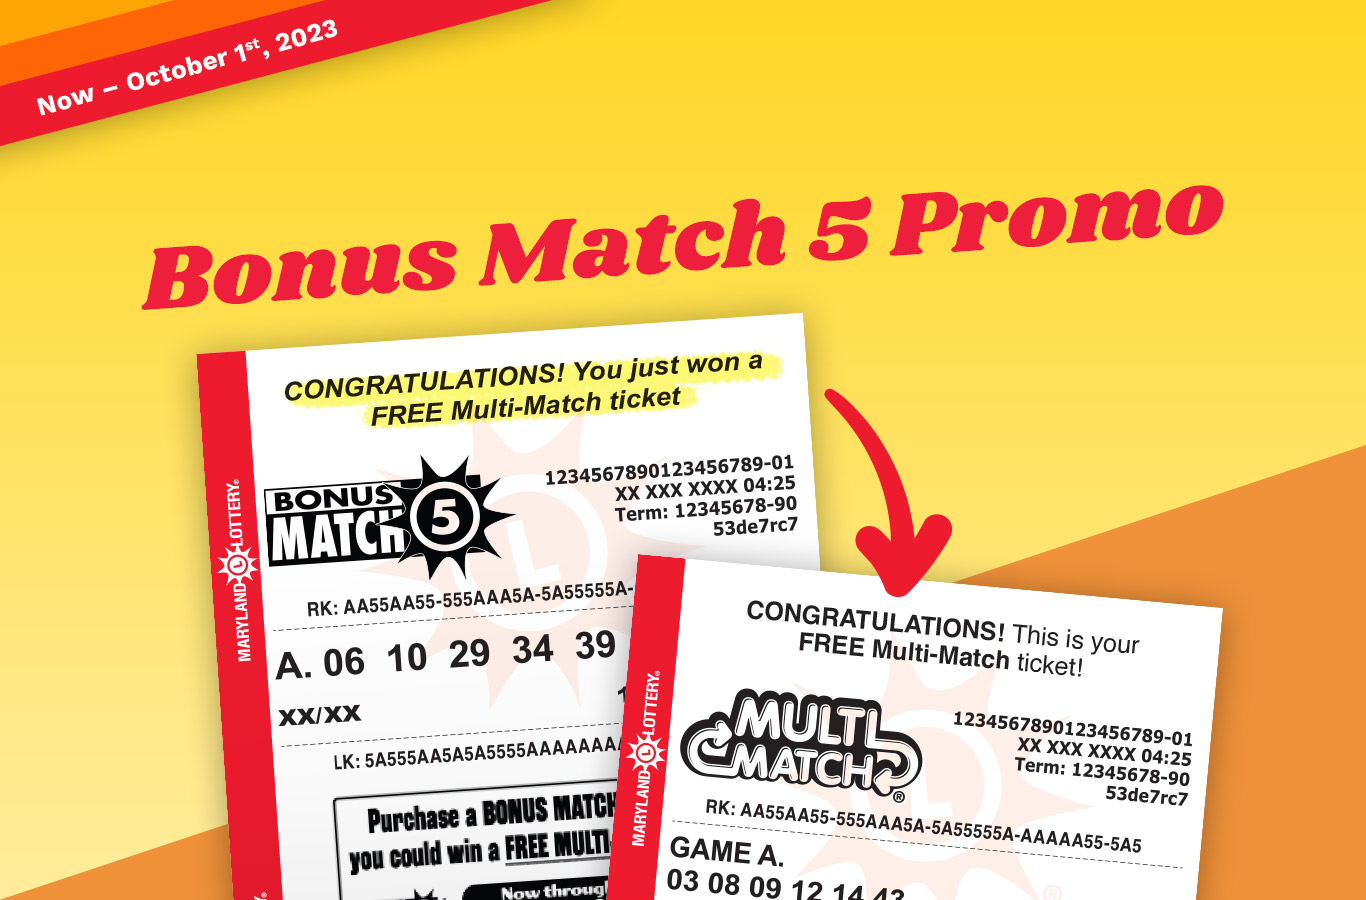 It’s a great time to play Bonus Match 5. Purchase a Bonus Match 5 ticket now through October 1st, and you could win a free Multi-Match ticket!